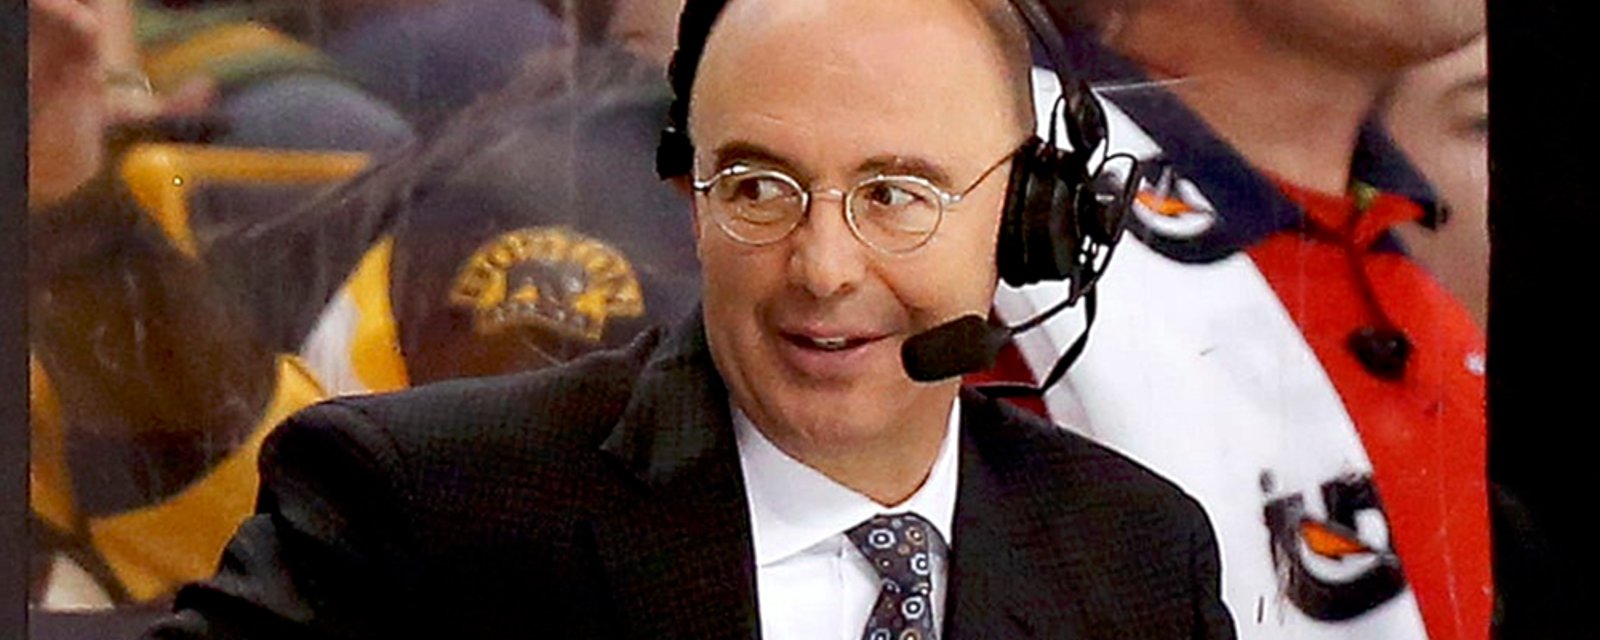 Pierre McGuire explains his excitement and why he joined Senators 